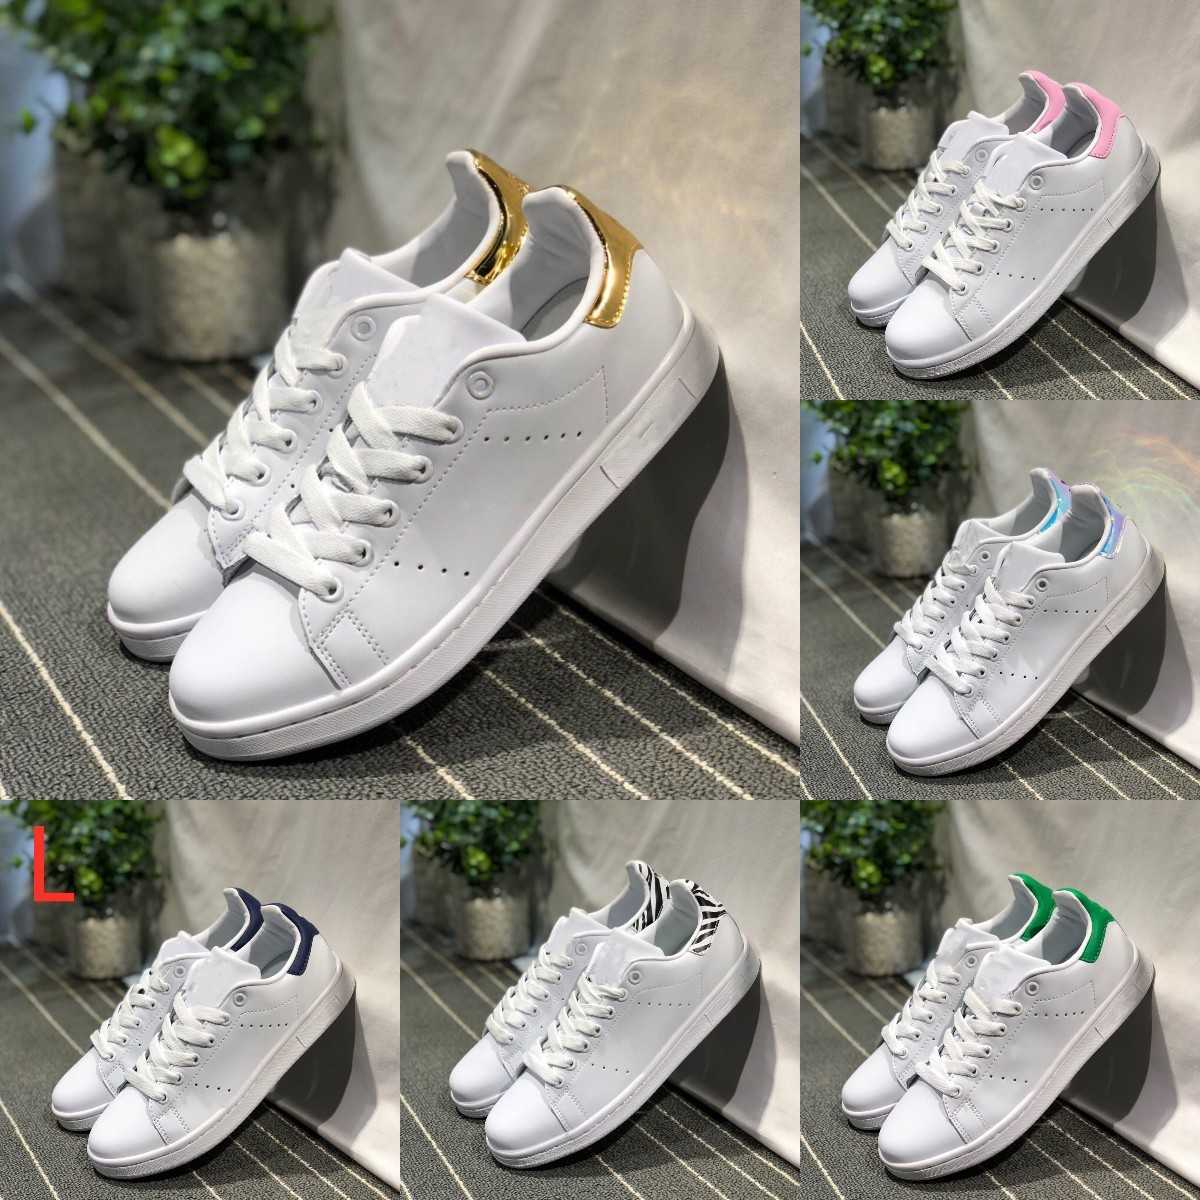 

2023 Mens Womens Free Superstar Casual Shoes Discount Designer White Black Pink Blue Gold Superstars 80s Pride Sneakers Super Star Women Men Sport Sneakers S01, Please contact us